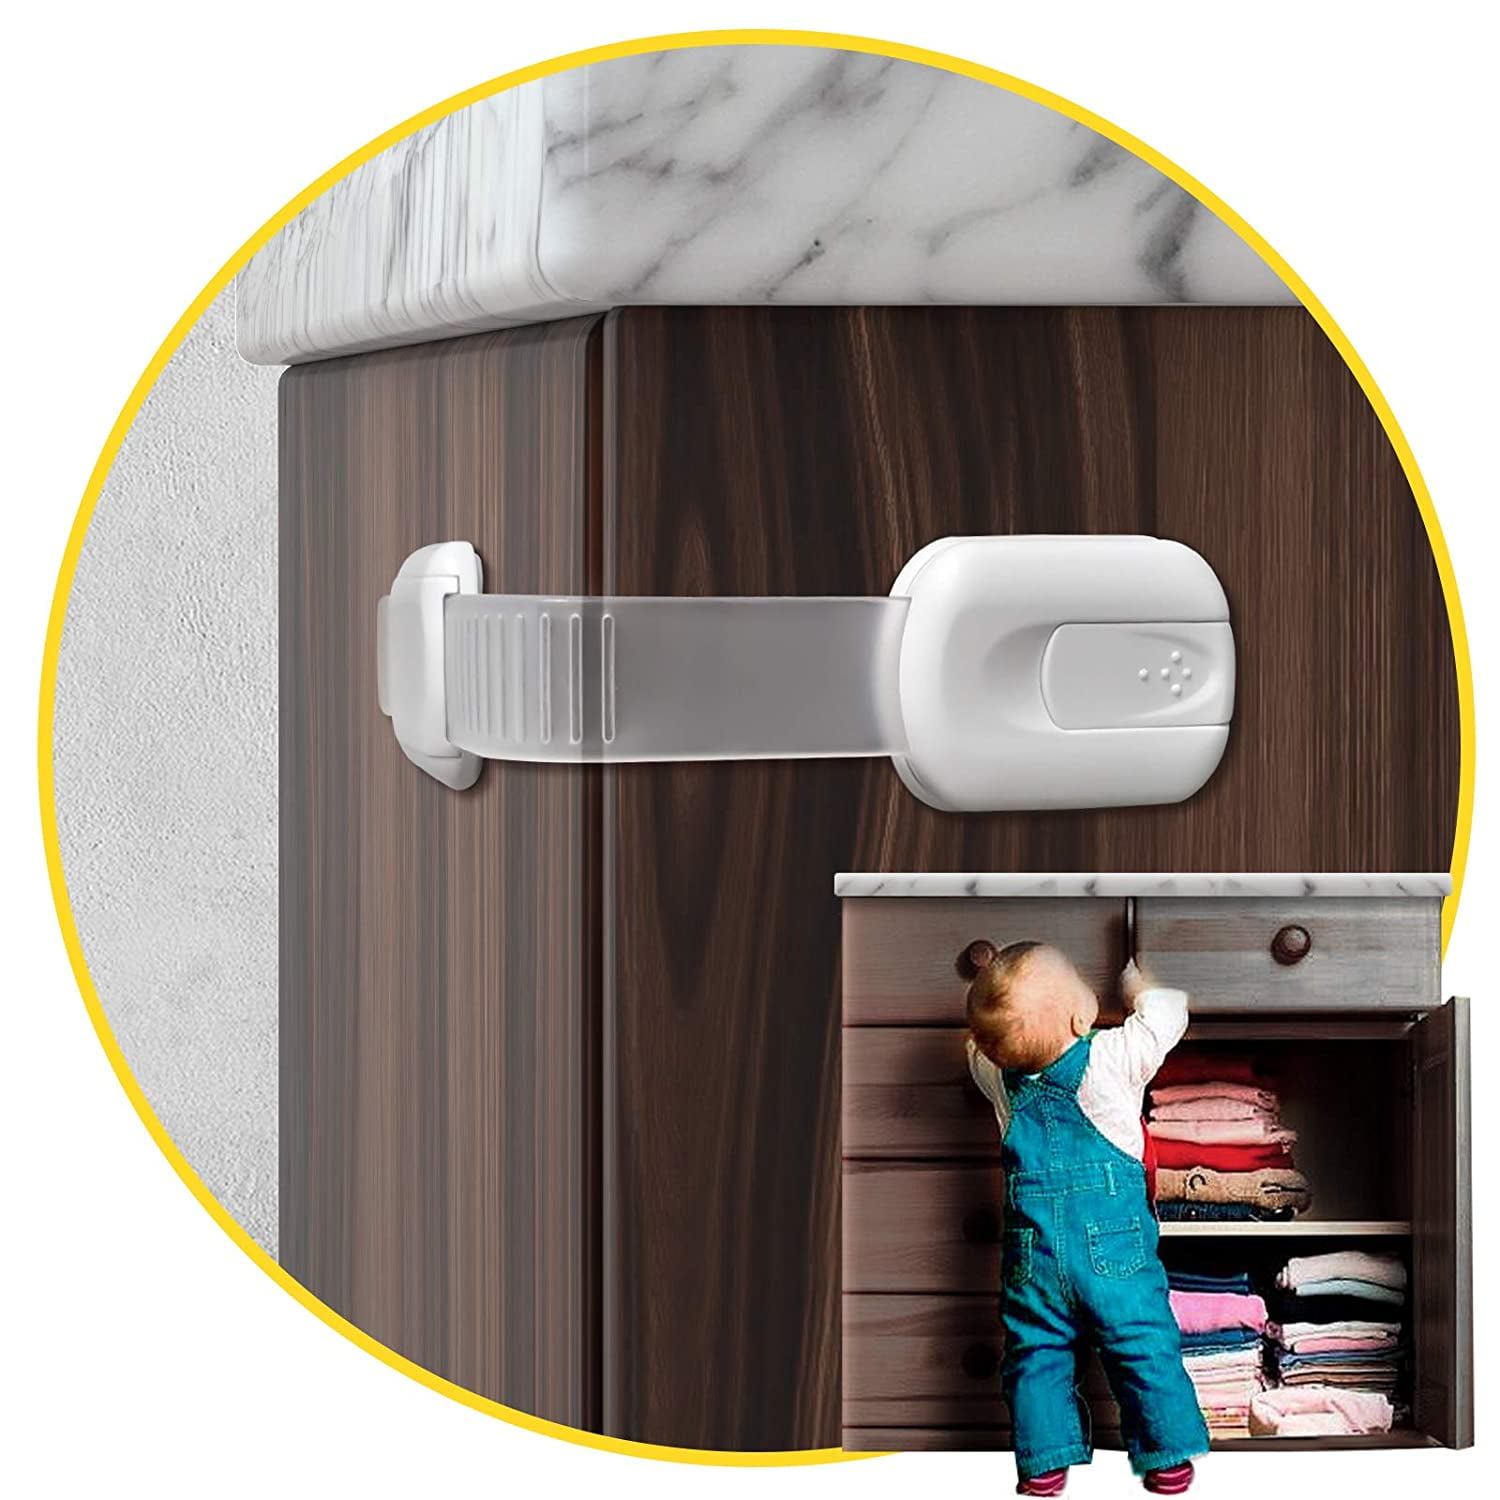 Come with 4 Pack Outlet Covers White 12 Pack Baby Safety Locks Latch for Drawers Adhesive No Drilling Child Proof Cabinet Locks 